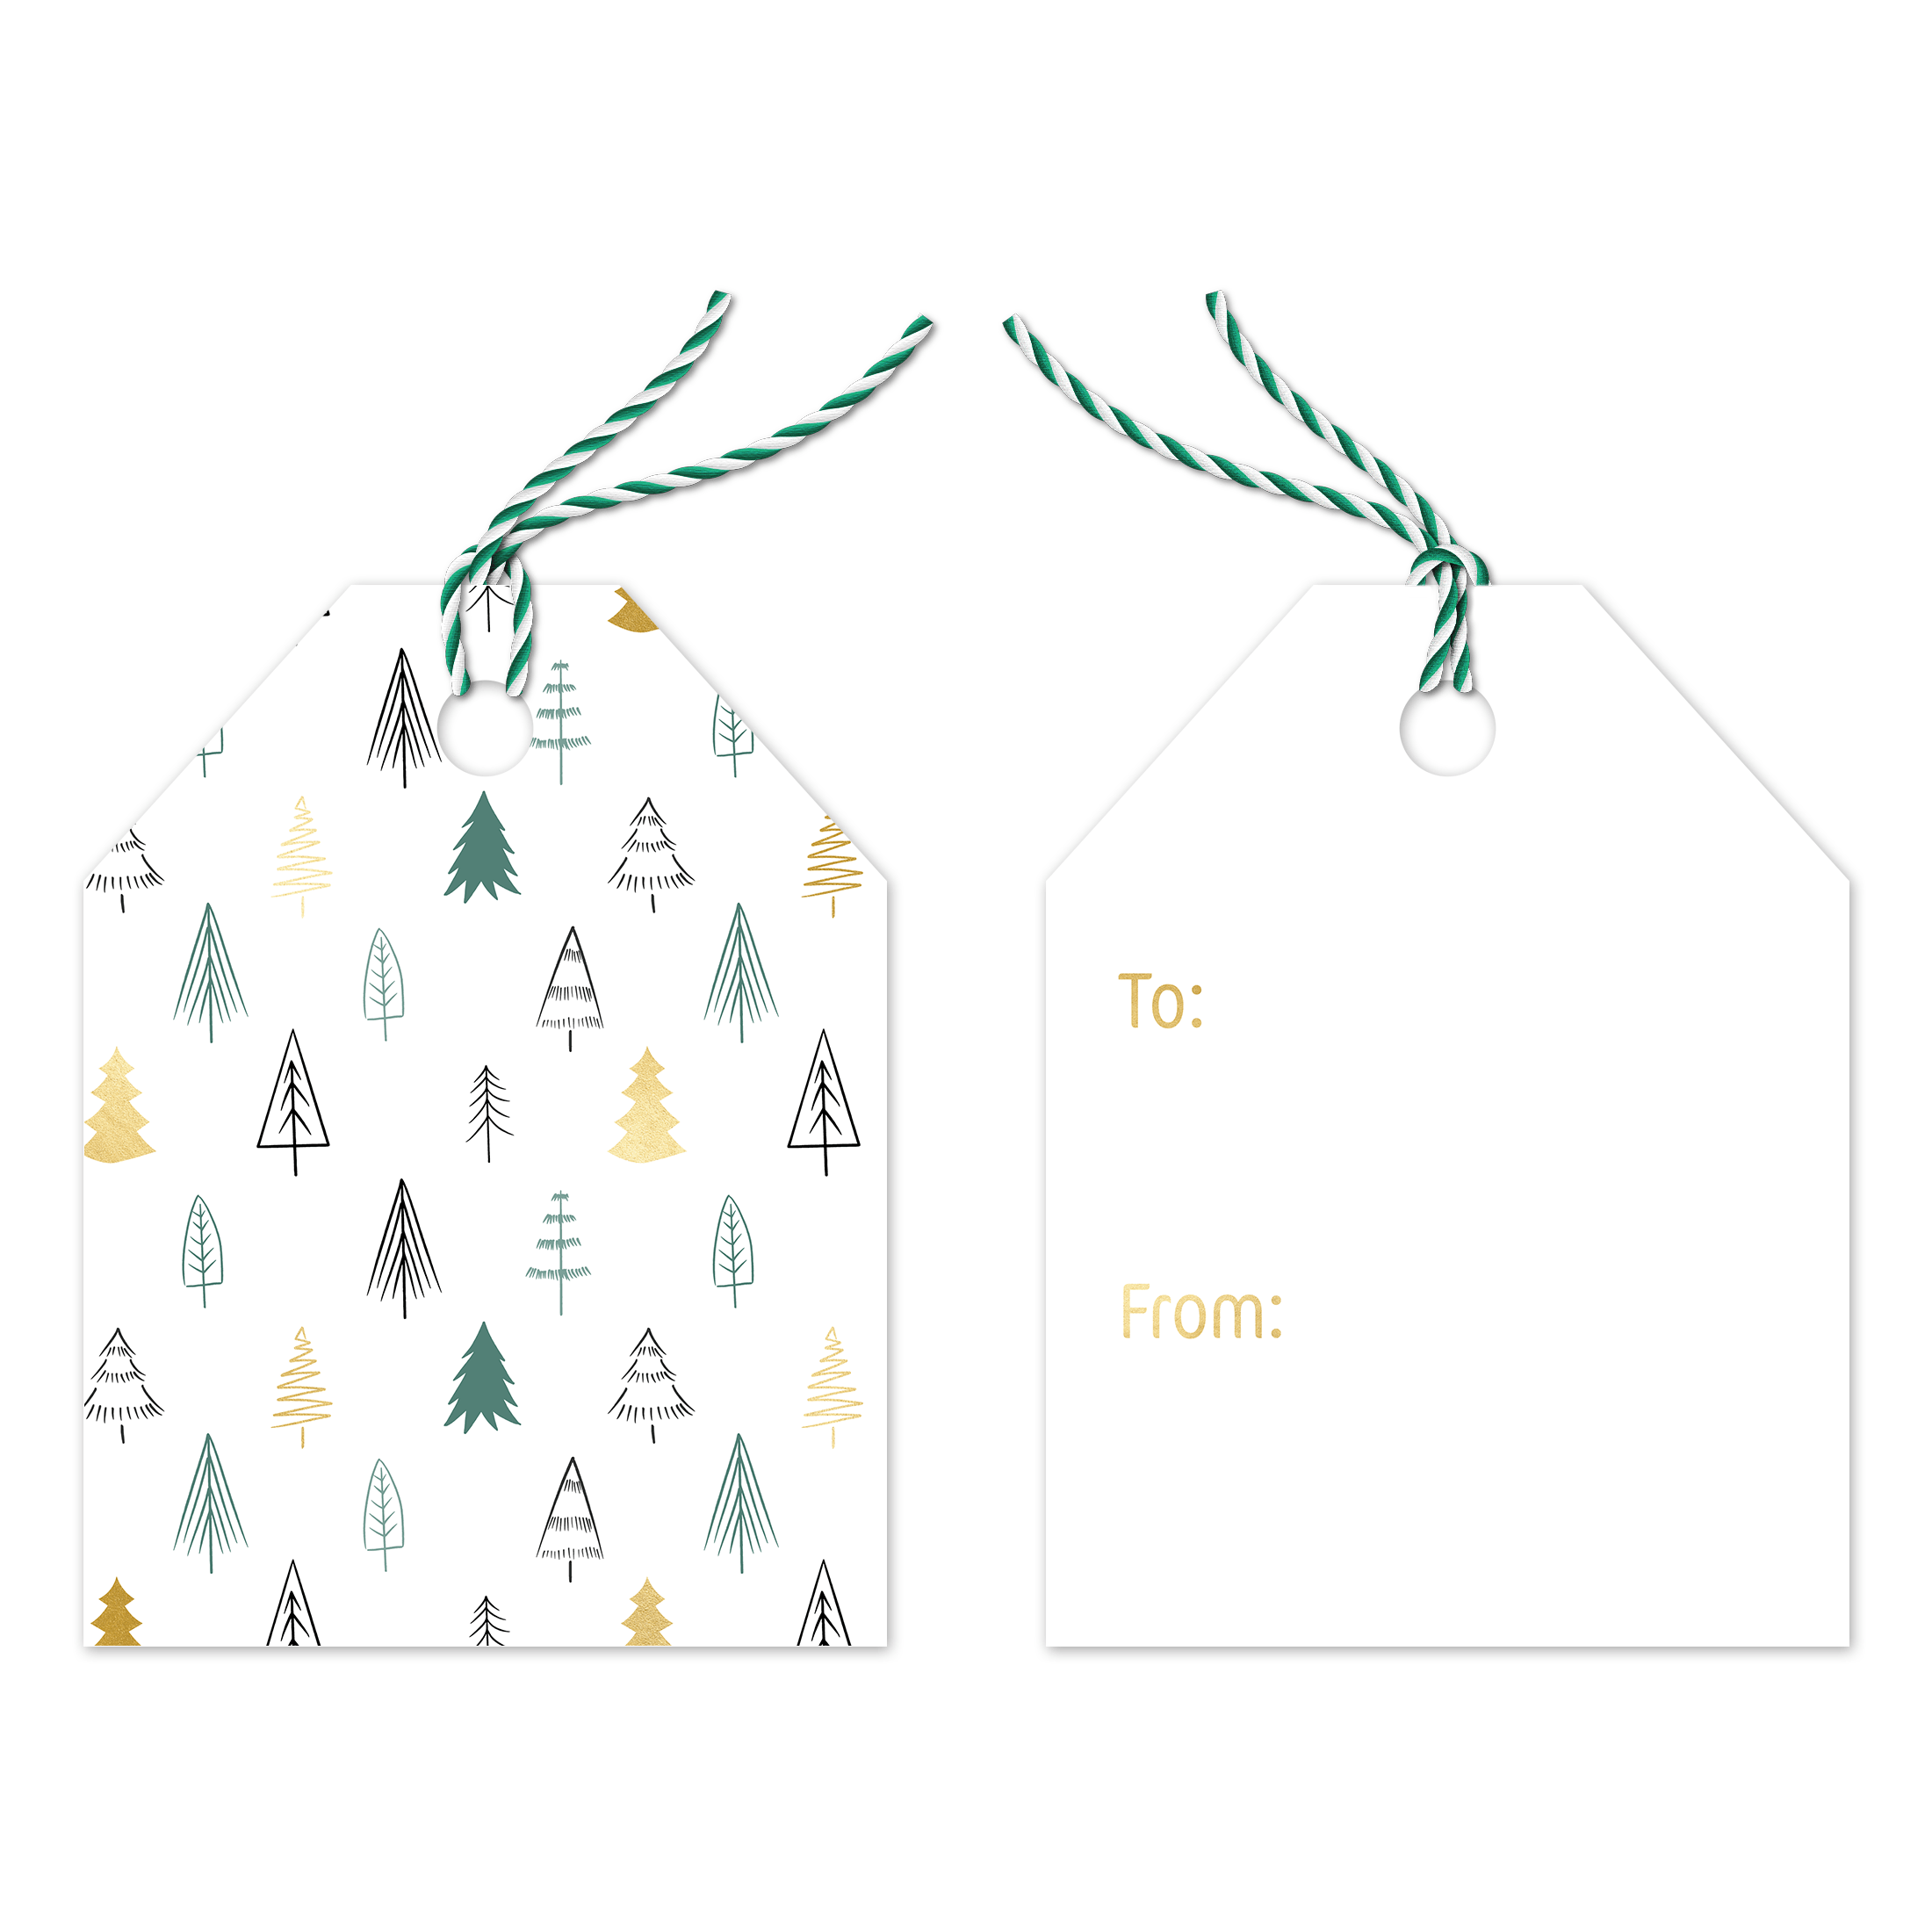 Happy Holidays Assortment Gift Tags - Pro Supply Global